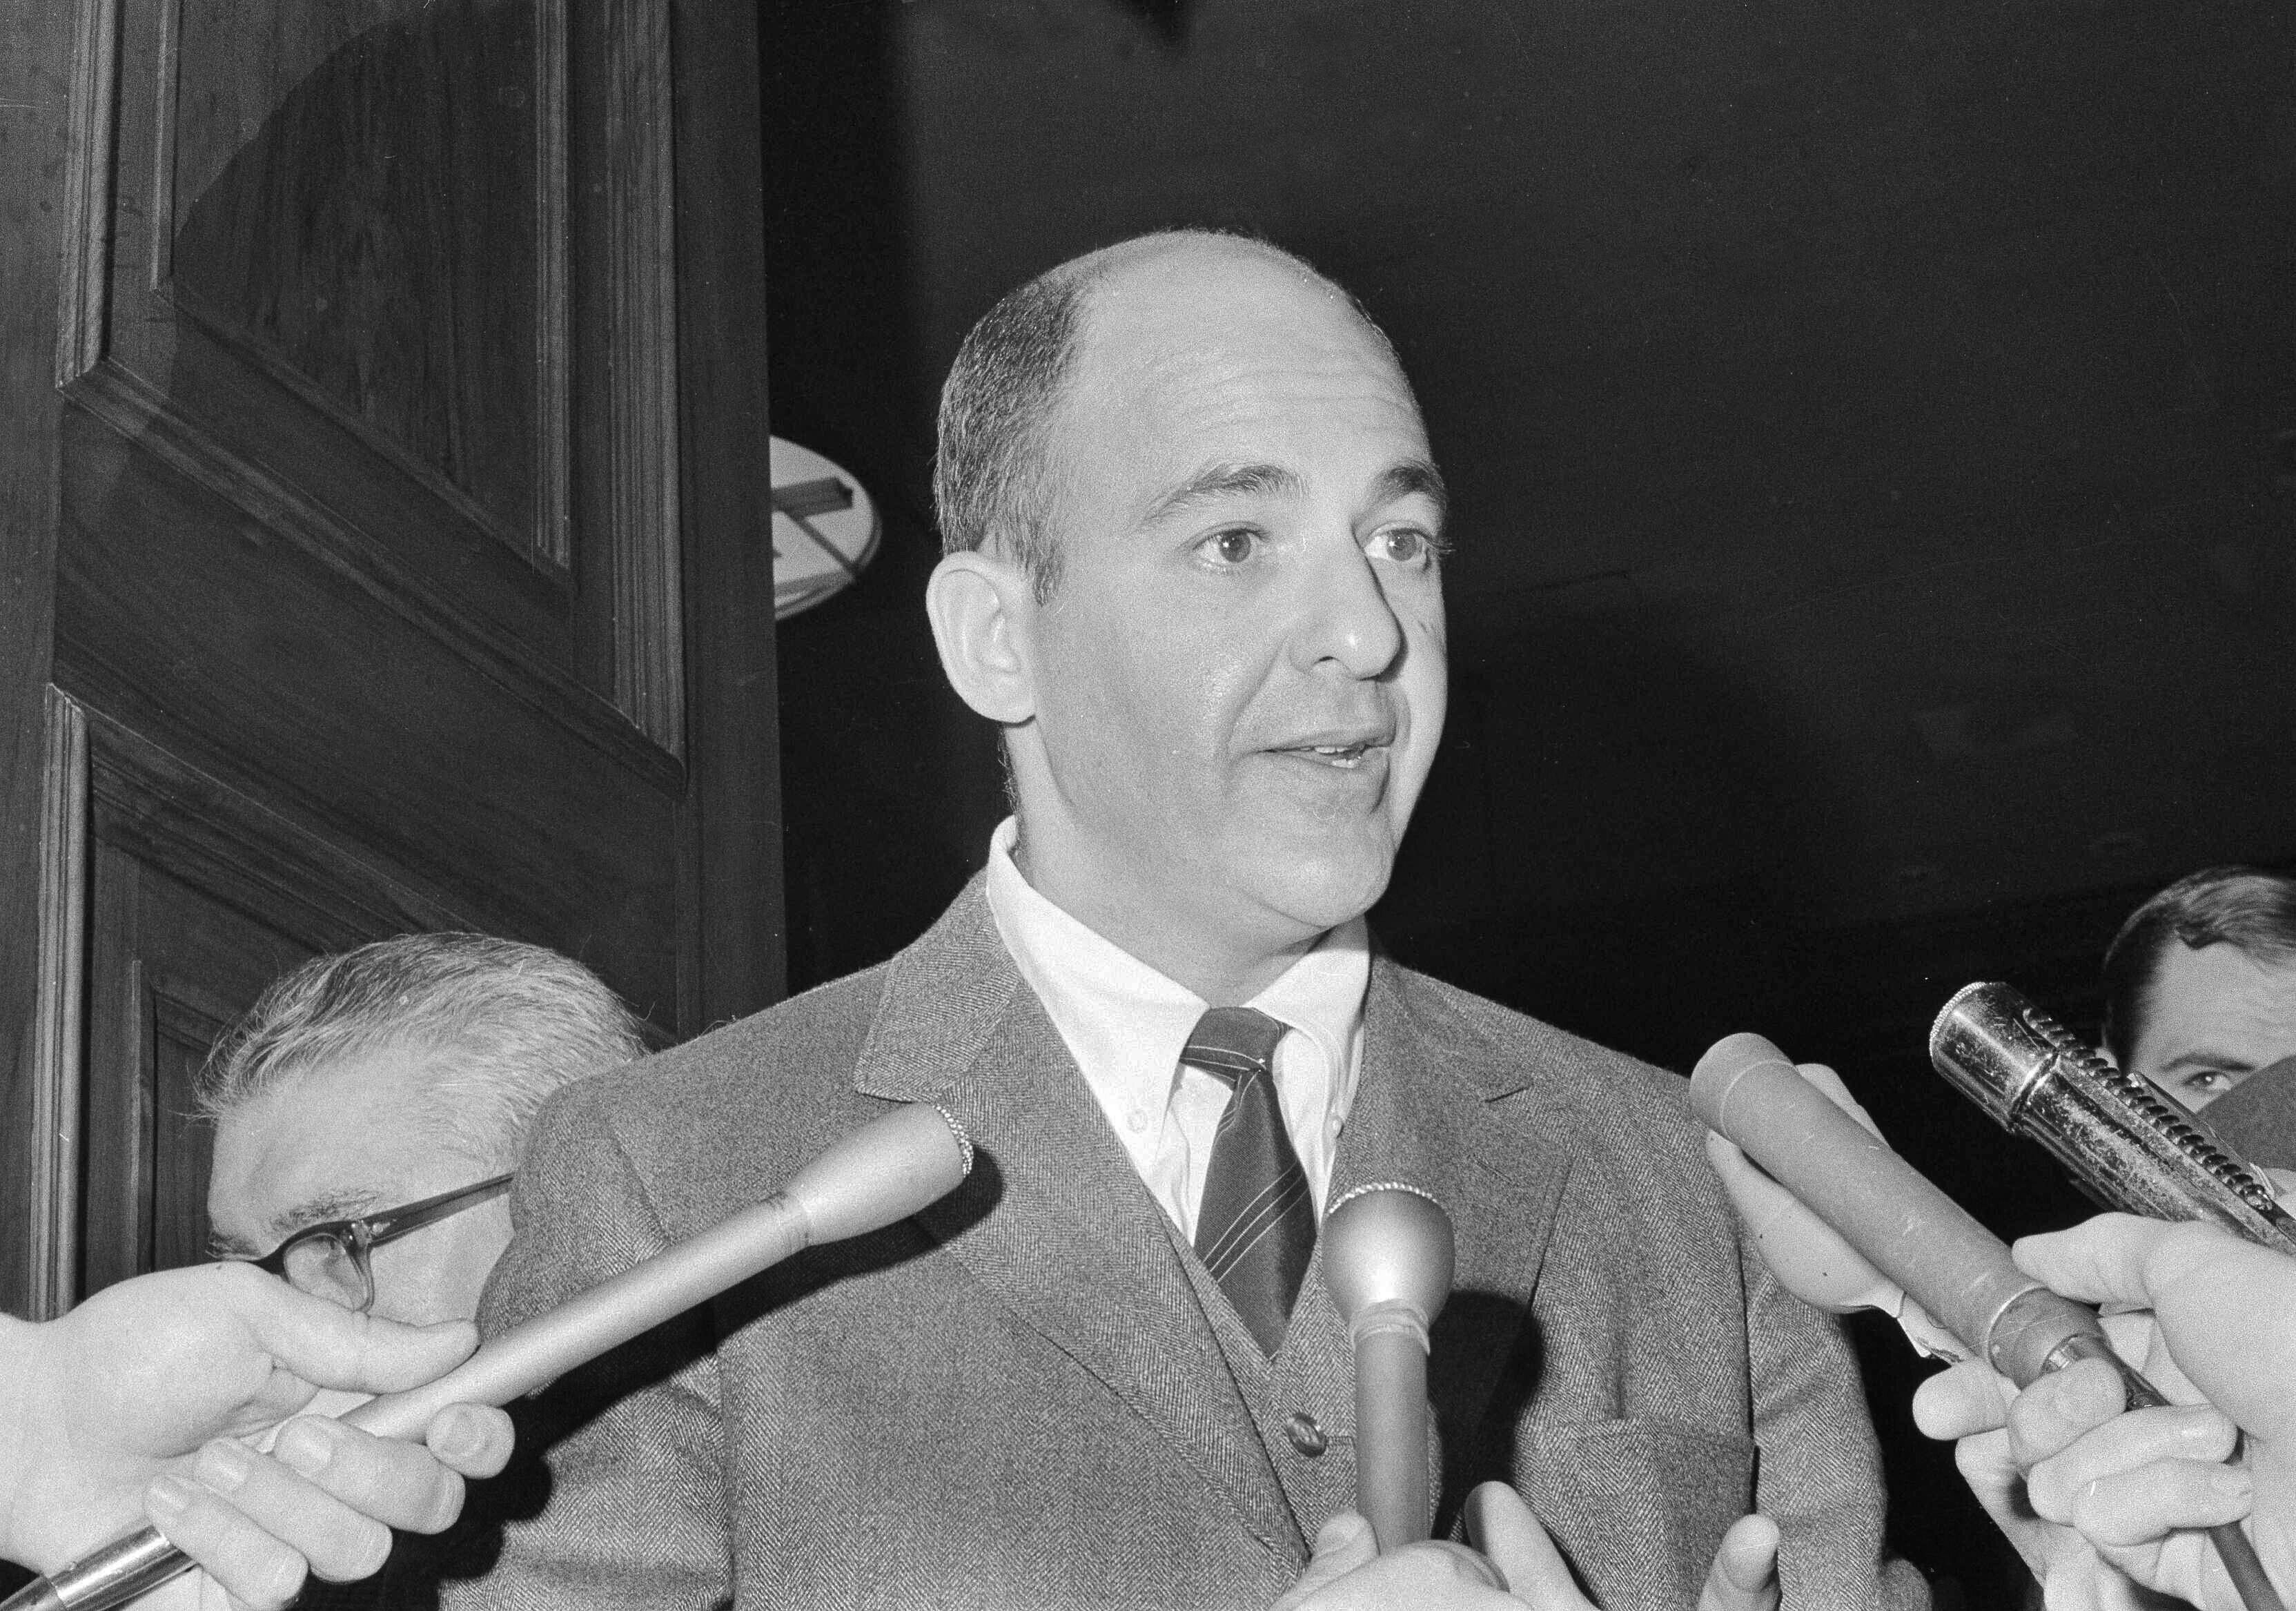 Cyril Wecht, pictured in 1969 speaking to reporters, died at 93 years old on Monday